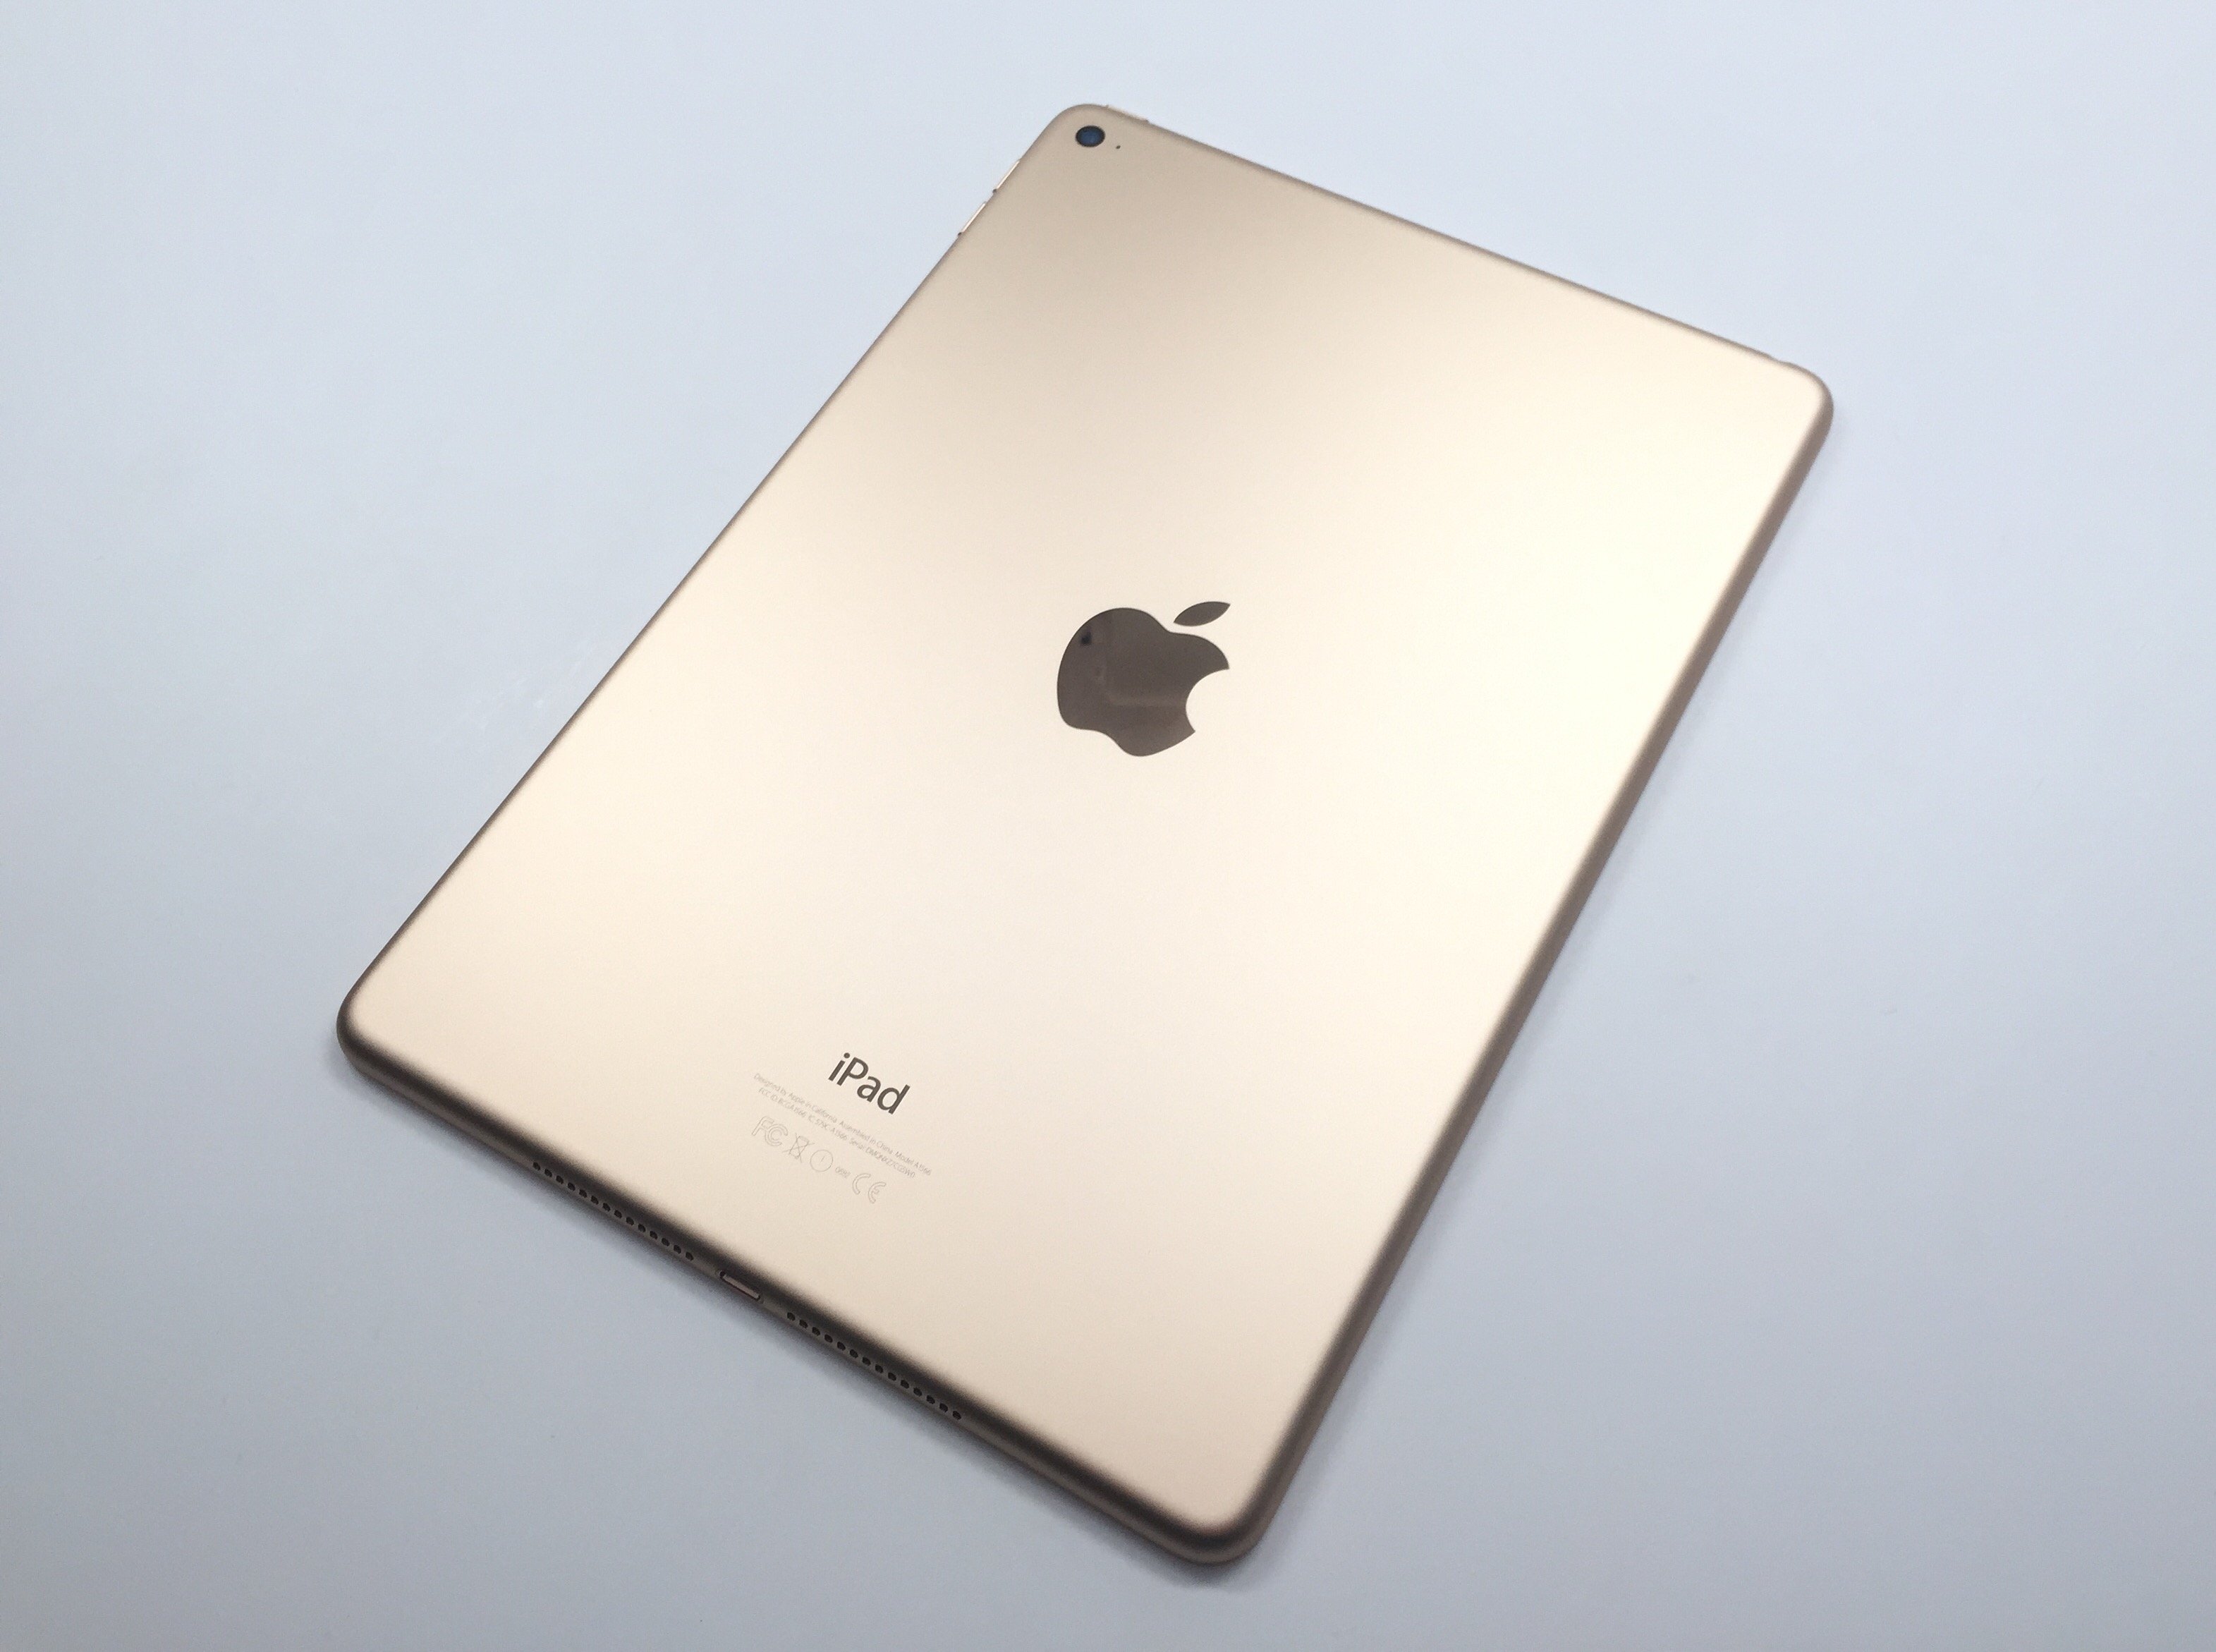 The new iPad air 2 is thinner, lighter and available in gold.